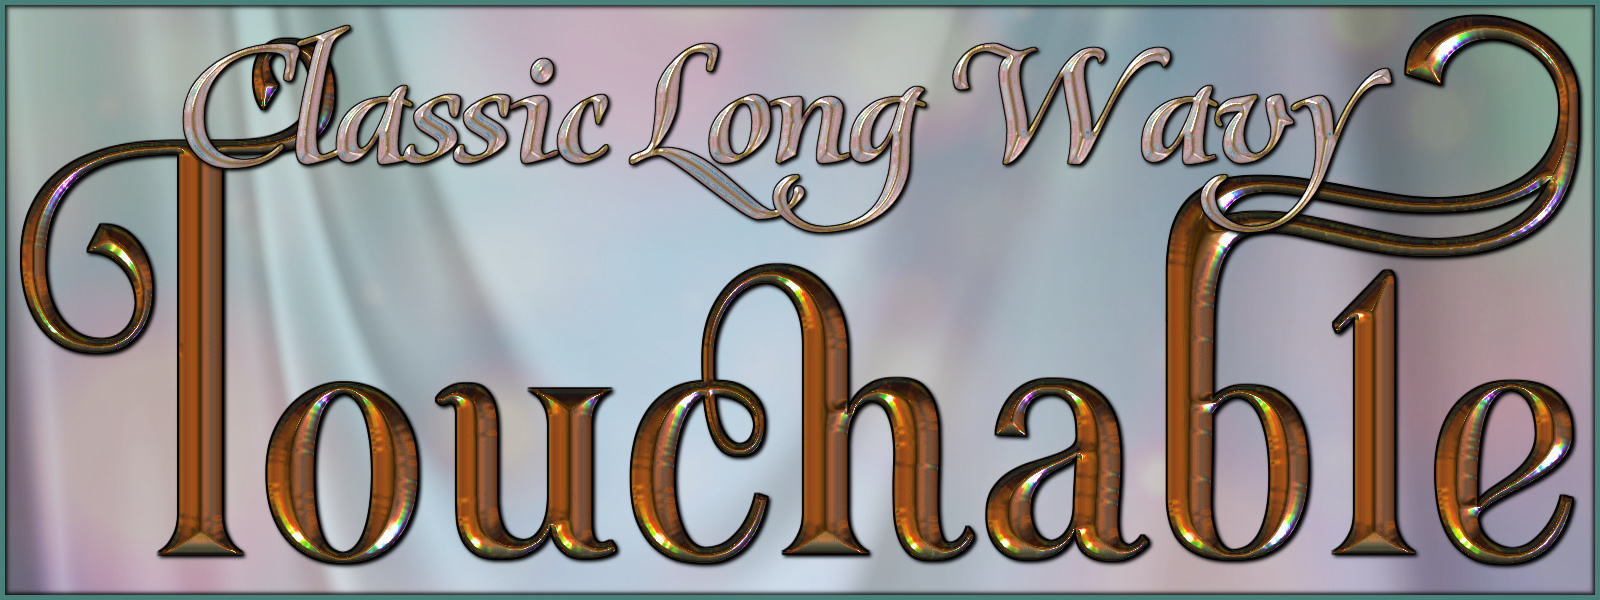 Touchable Classic Long Wavy by: ~Wolfie~, 3D Models by Daz 3D